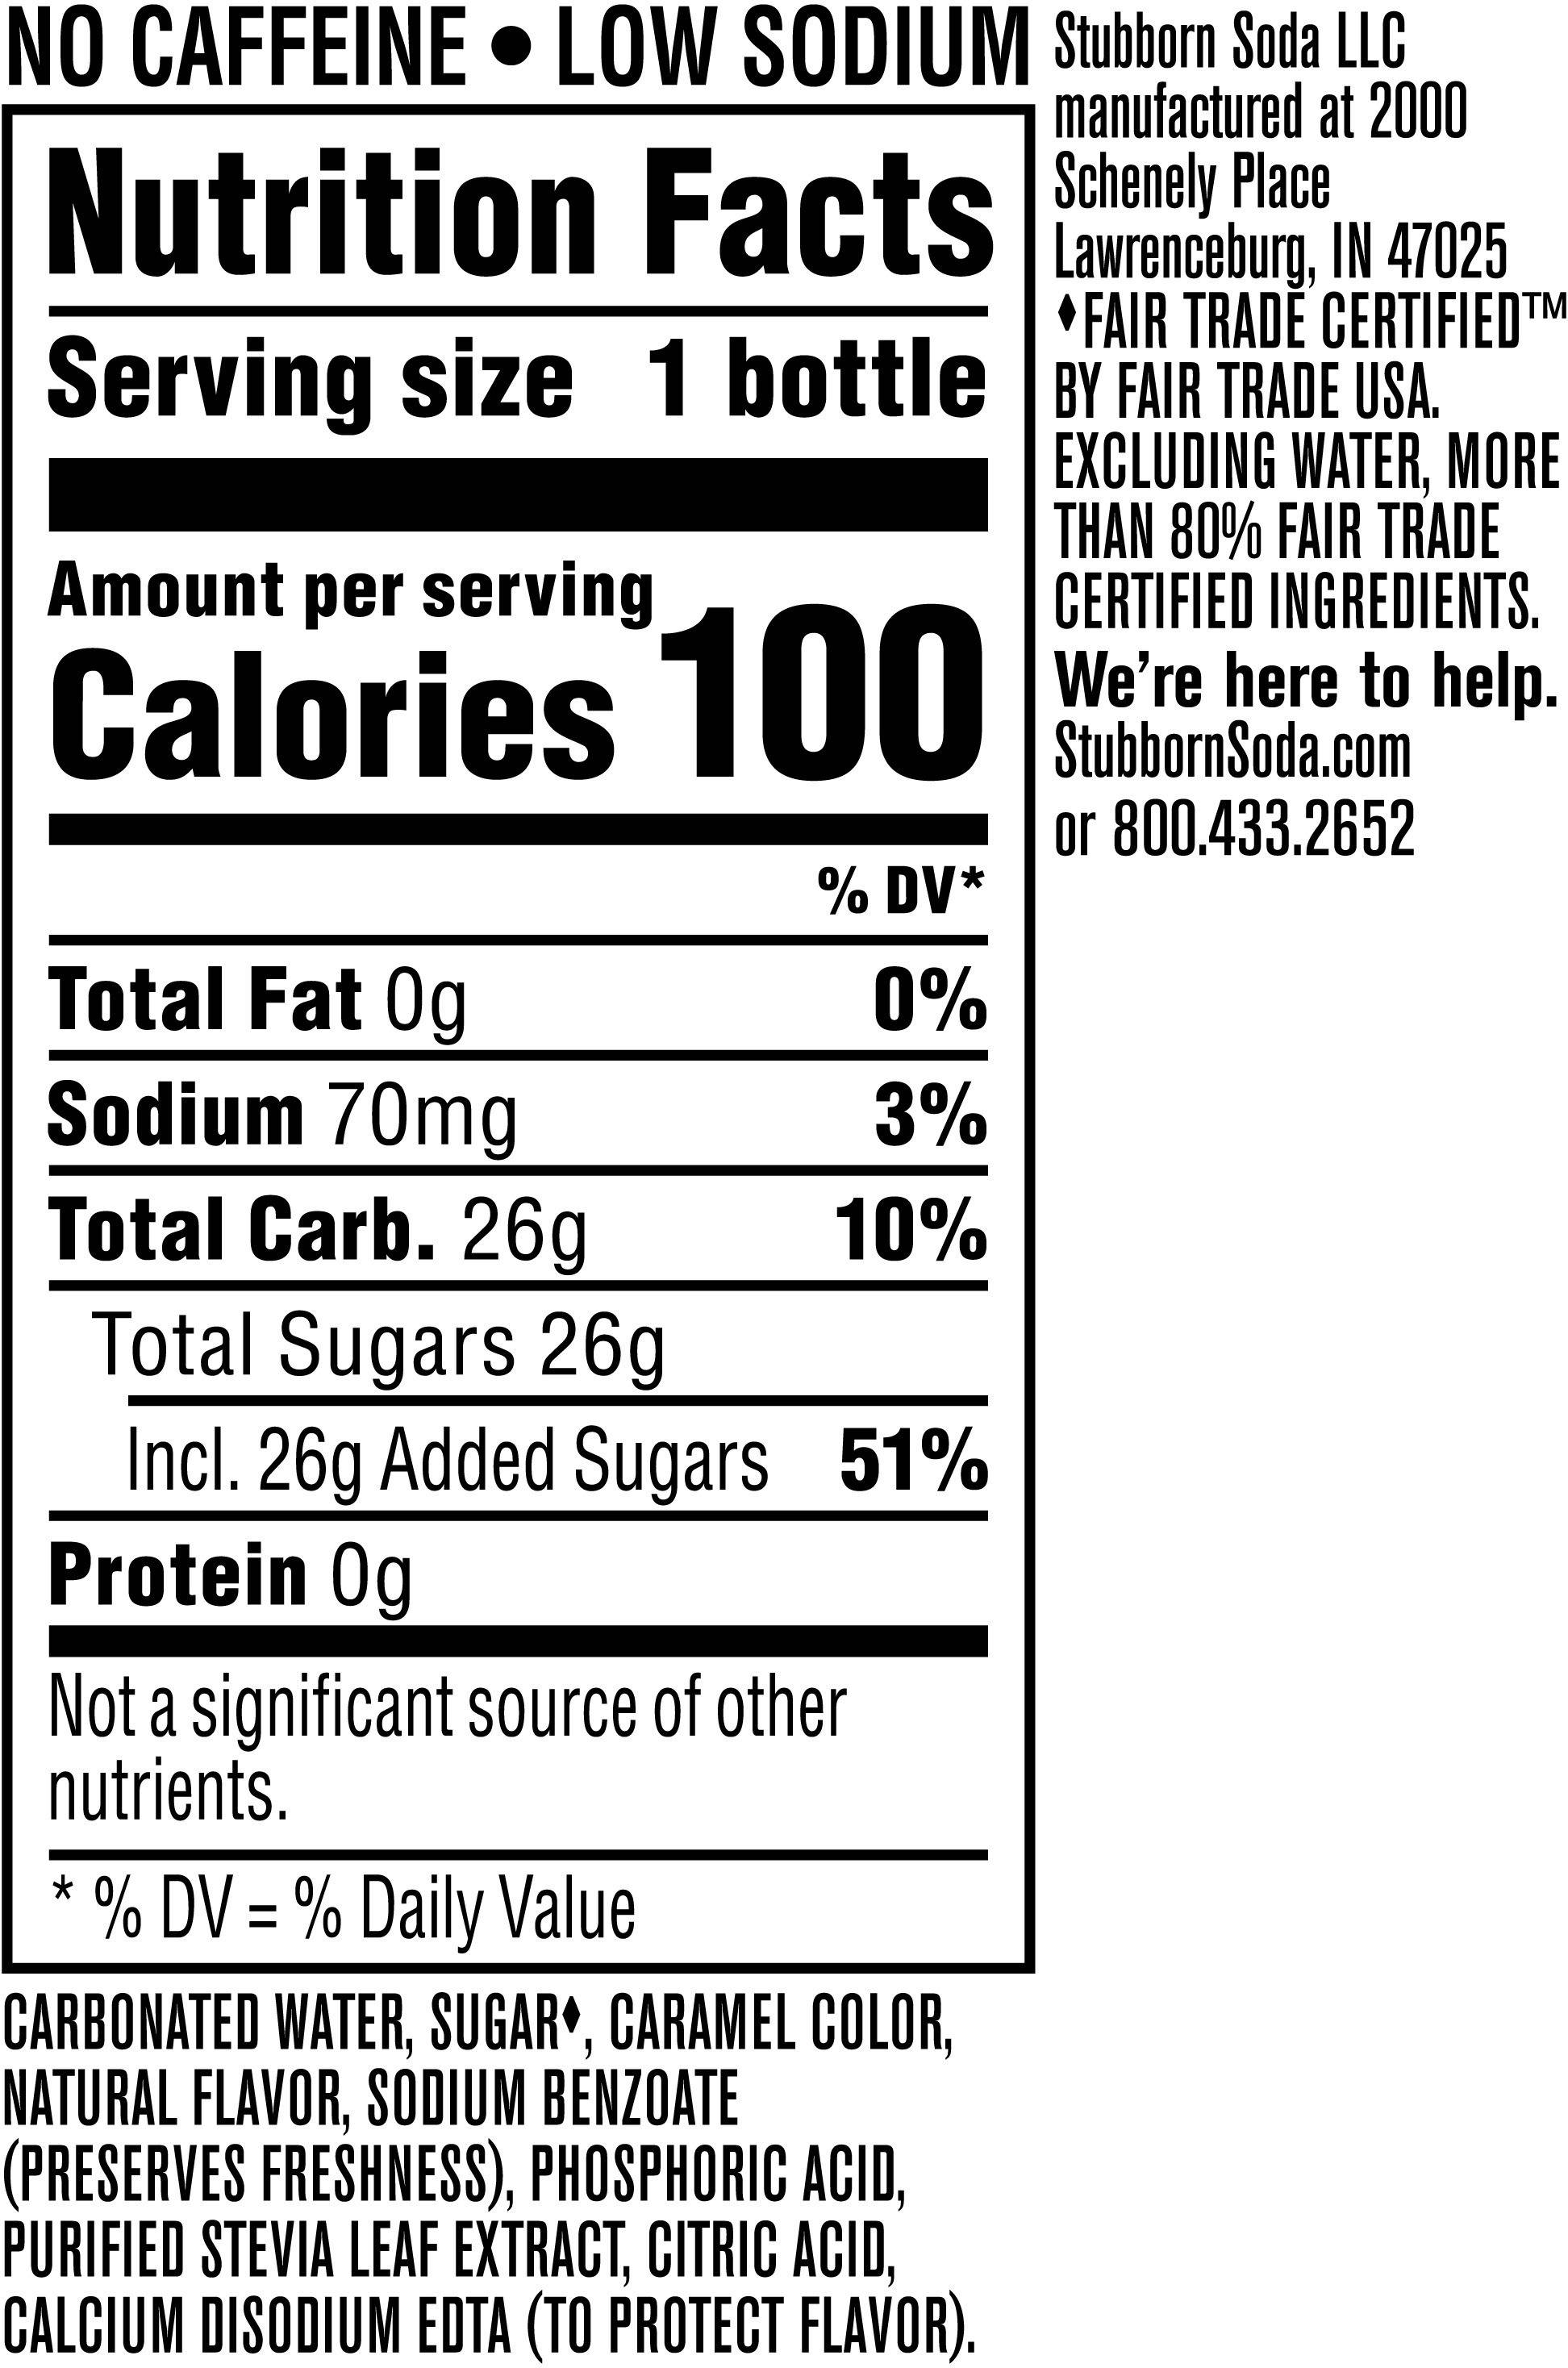 Image describing nutrition information for product Stubborn Soda Classic Root Beer